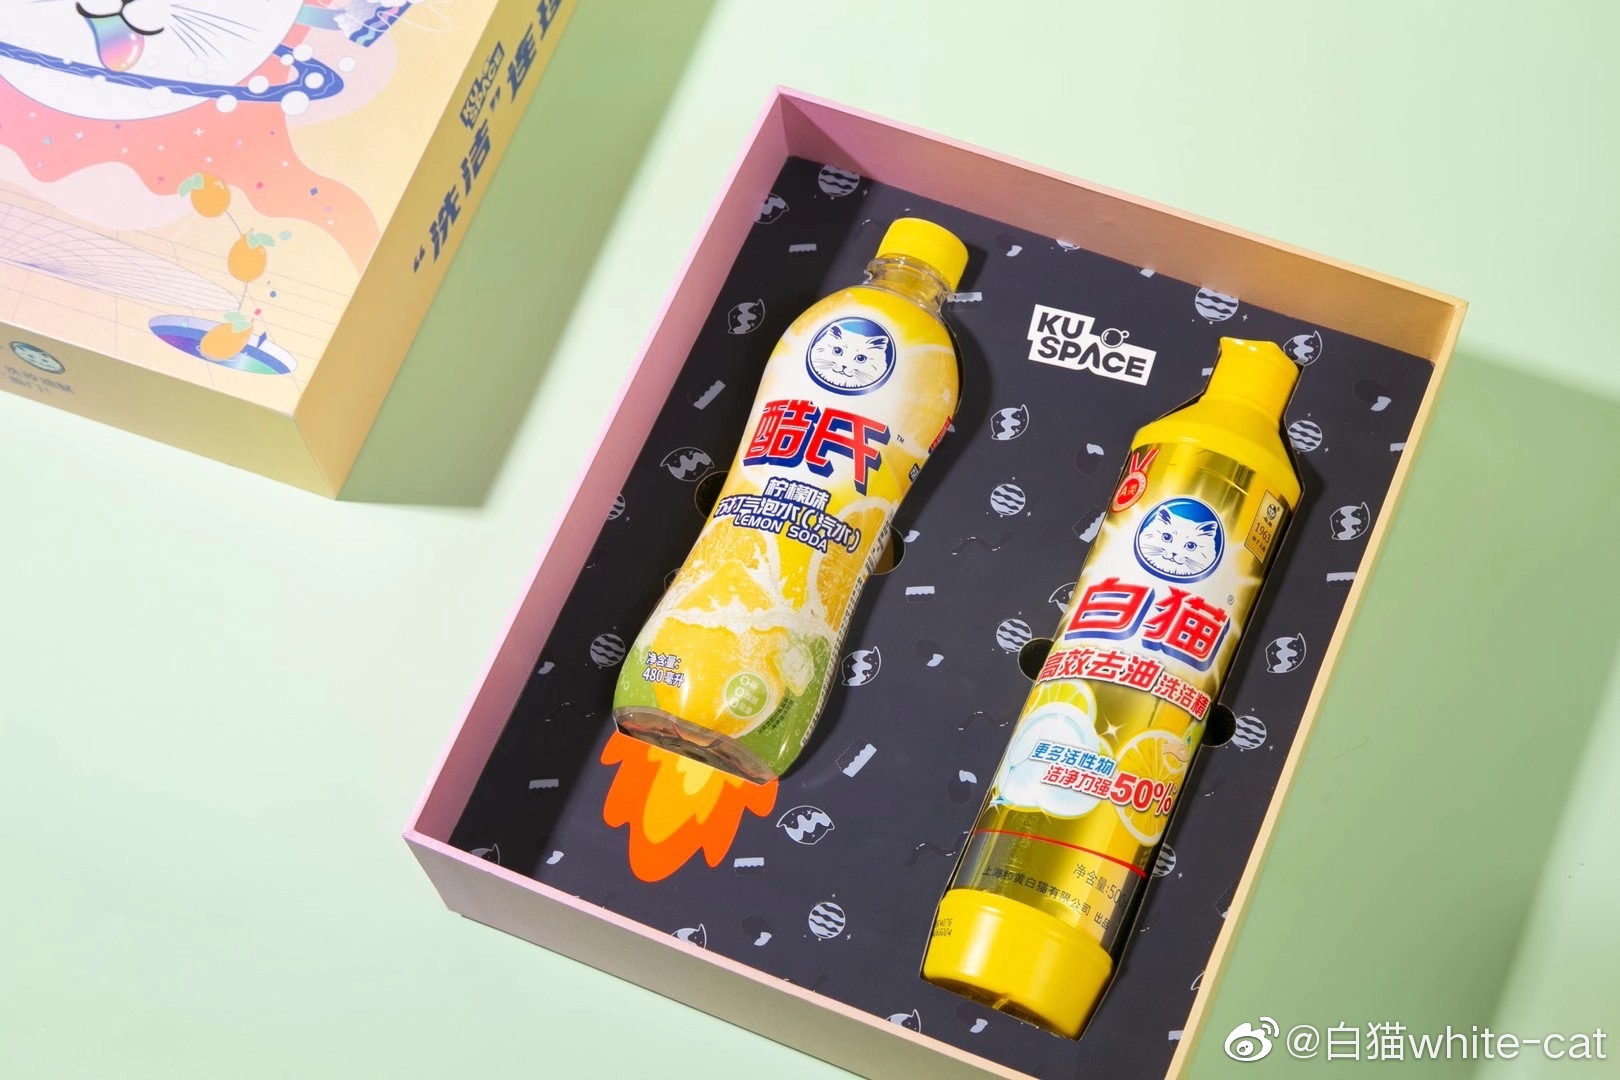 The earliest brand of laundry detergent in China has recently launched a detergent-flavored soda